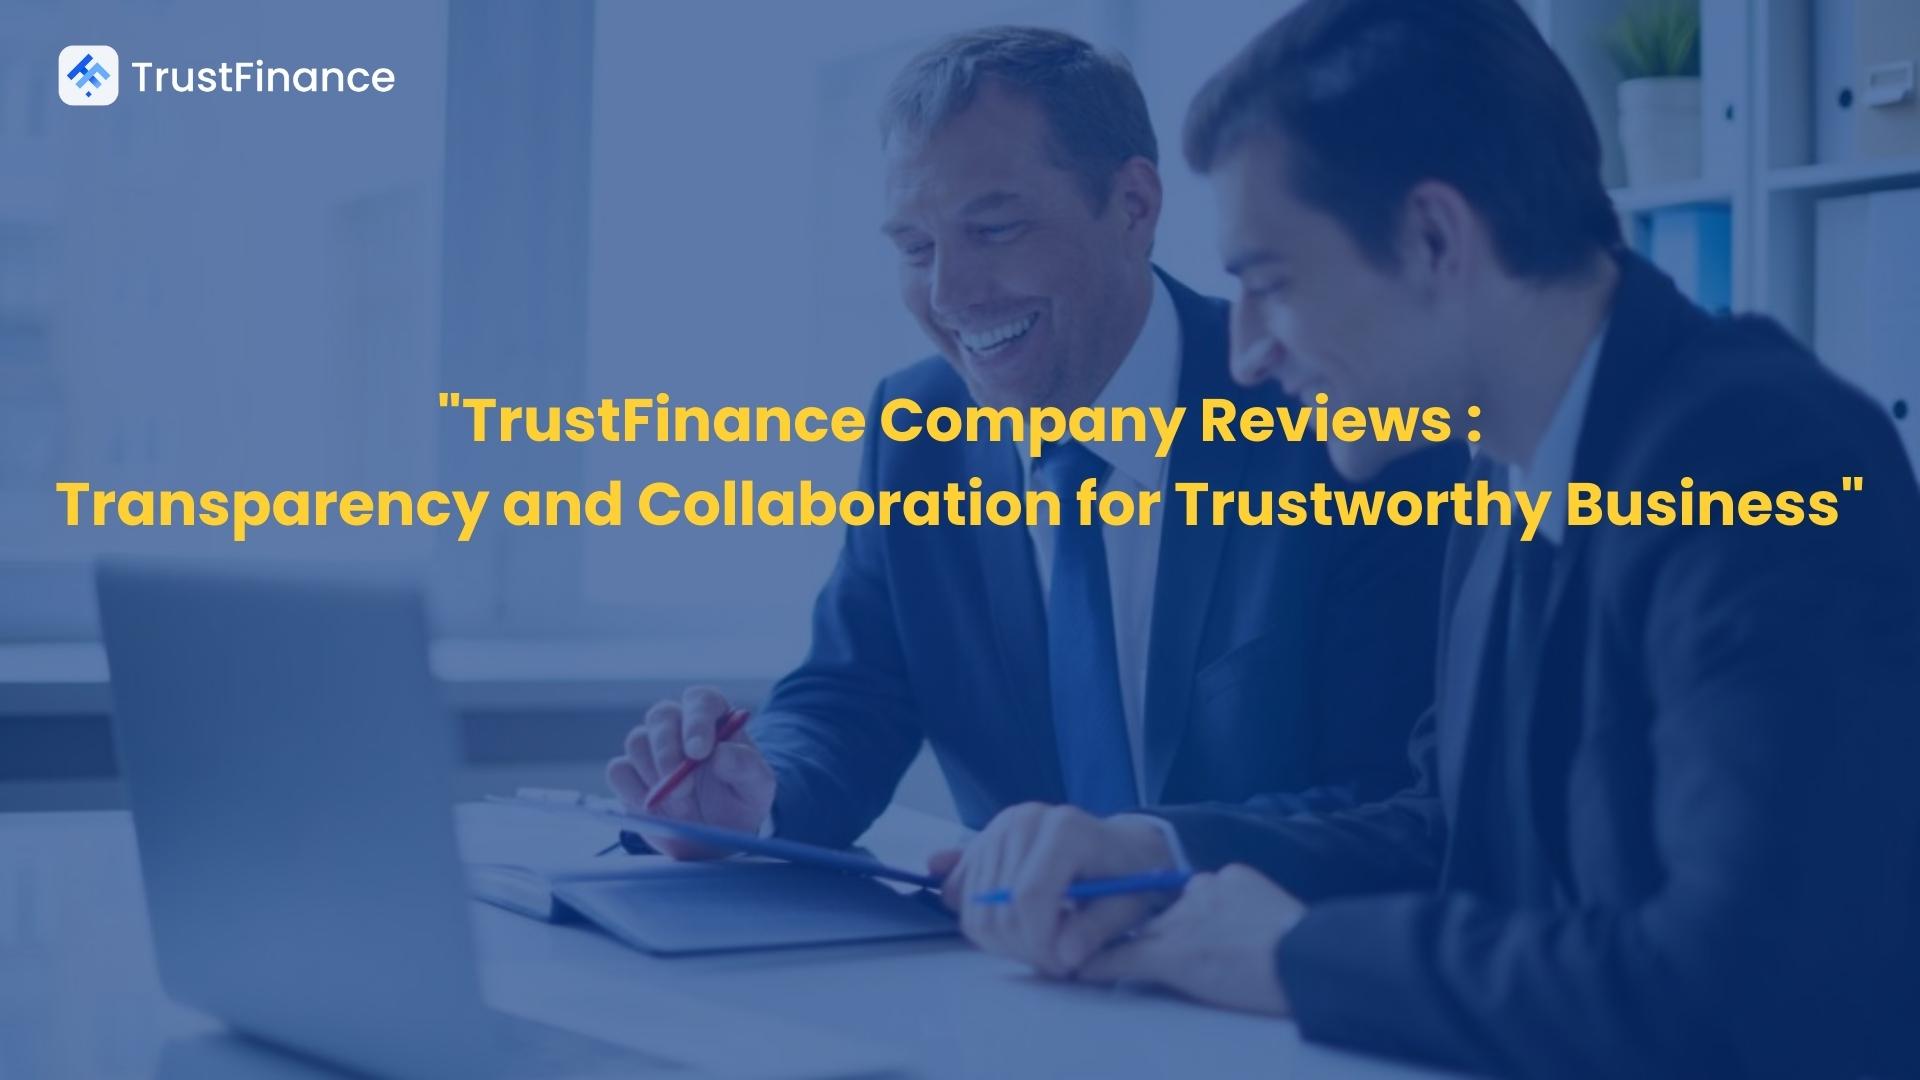 TrustFinance Company Reviews: Transparency and Collaboration for Trustworthy Business